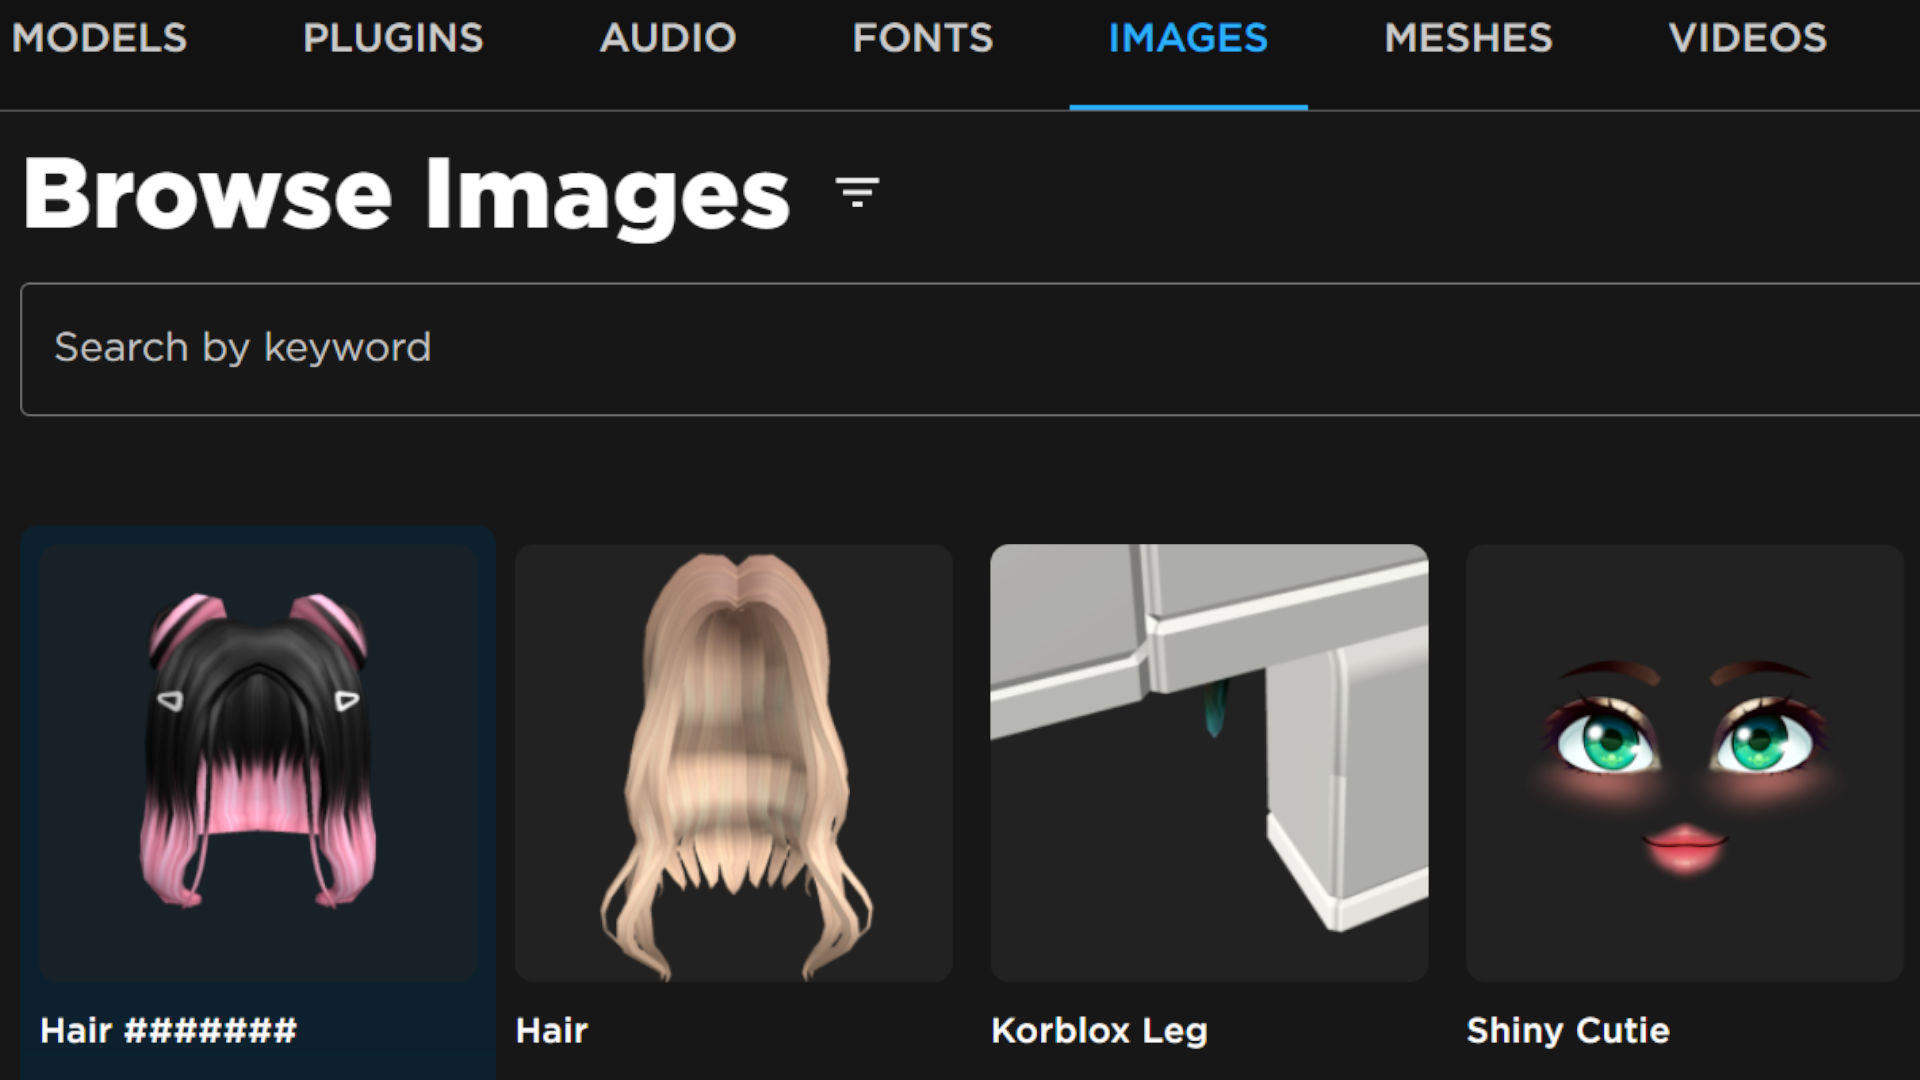 Roblox on X: Looking for models, decals, audio, & plugins? They